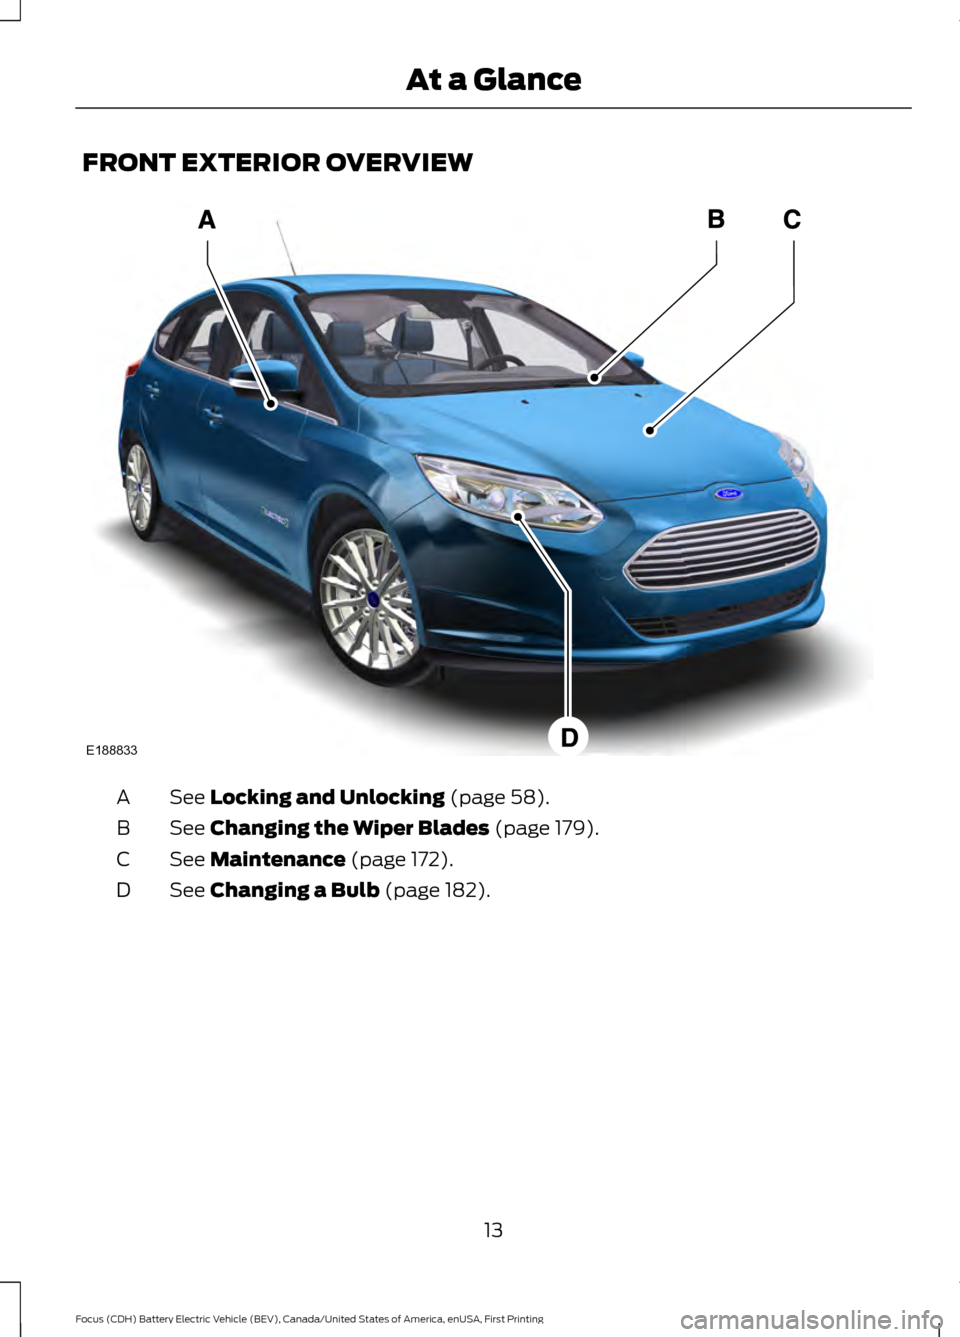 FORD FOCUS ELECTRIC 2016 3.G Owners Manual FRONT EXTERIOR OVERVIEW
See Locking and Unlocking (page 58).
A
See 
Changing the Wiper Blades (page 179).
B
See 
Maintenance (page 172).
C
See 
Changing a Bulb (page 182).
D
13
Focus (CDH) Battery Ele